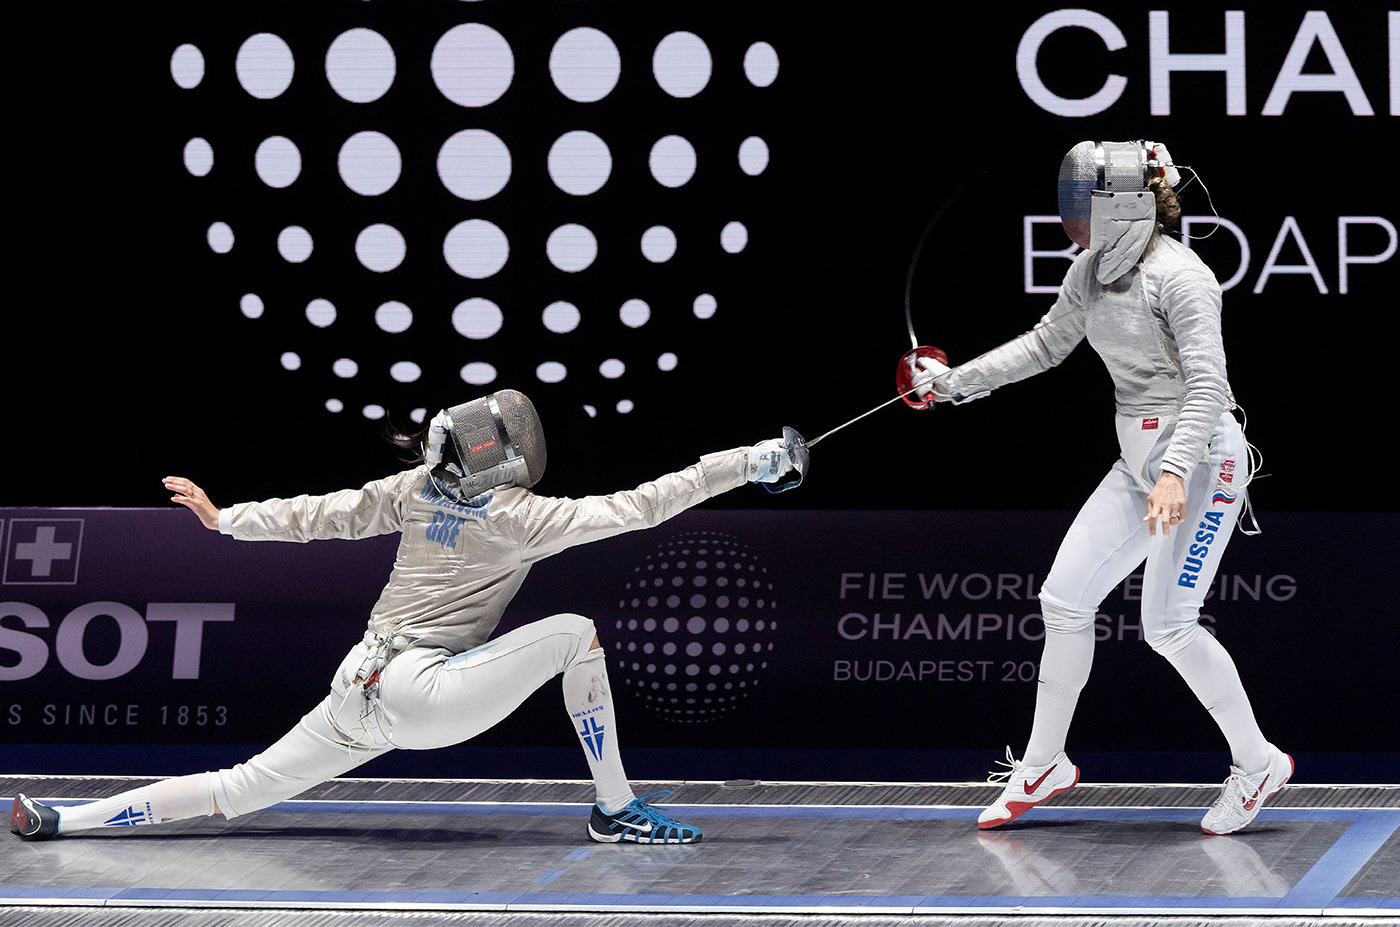 New Logo and Identity for 2019 World Fencing Championships by Explicit Design Studio